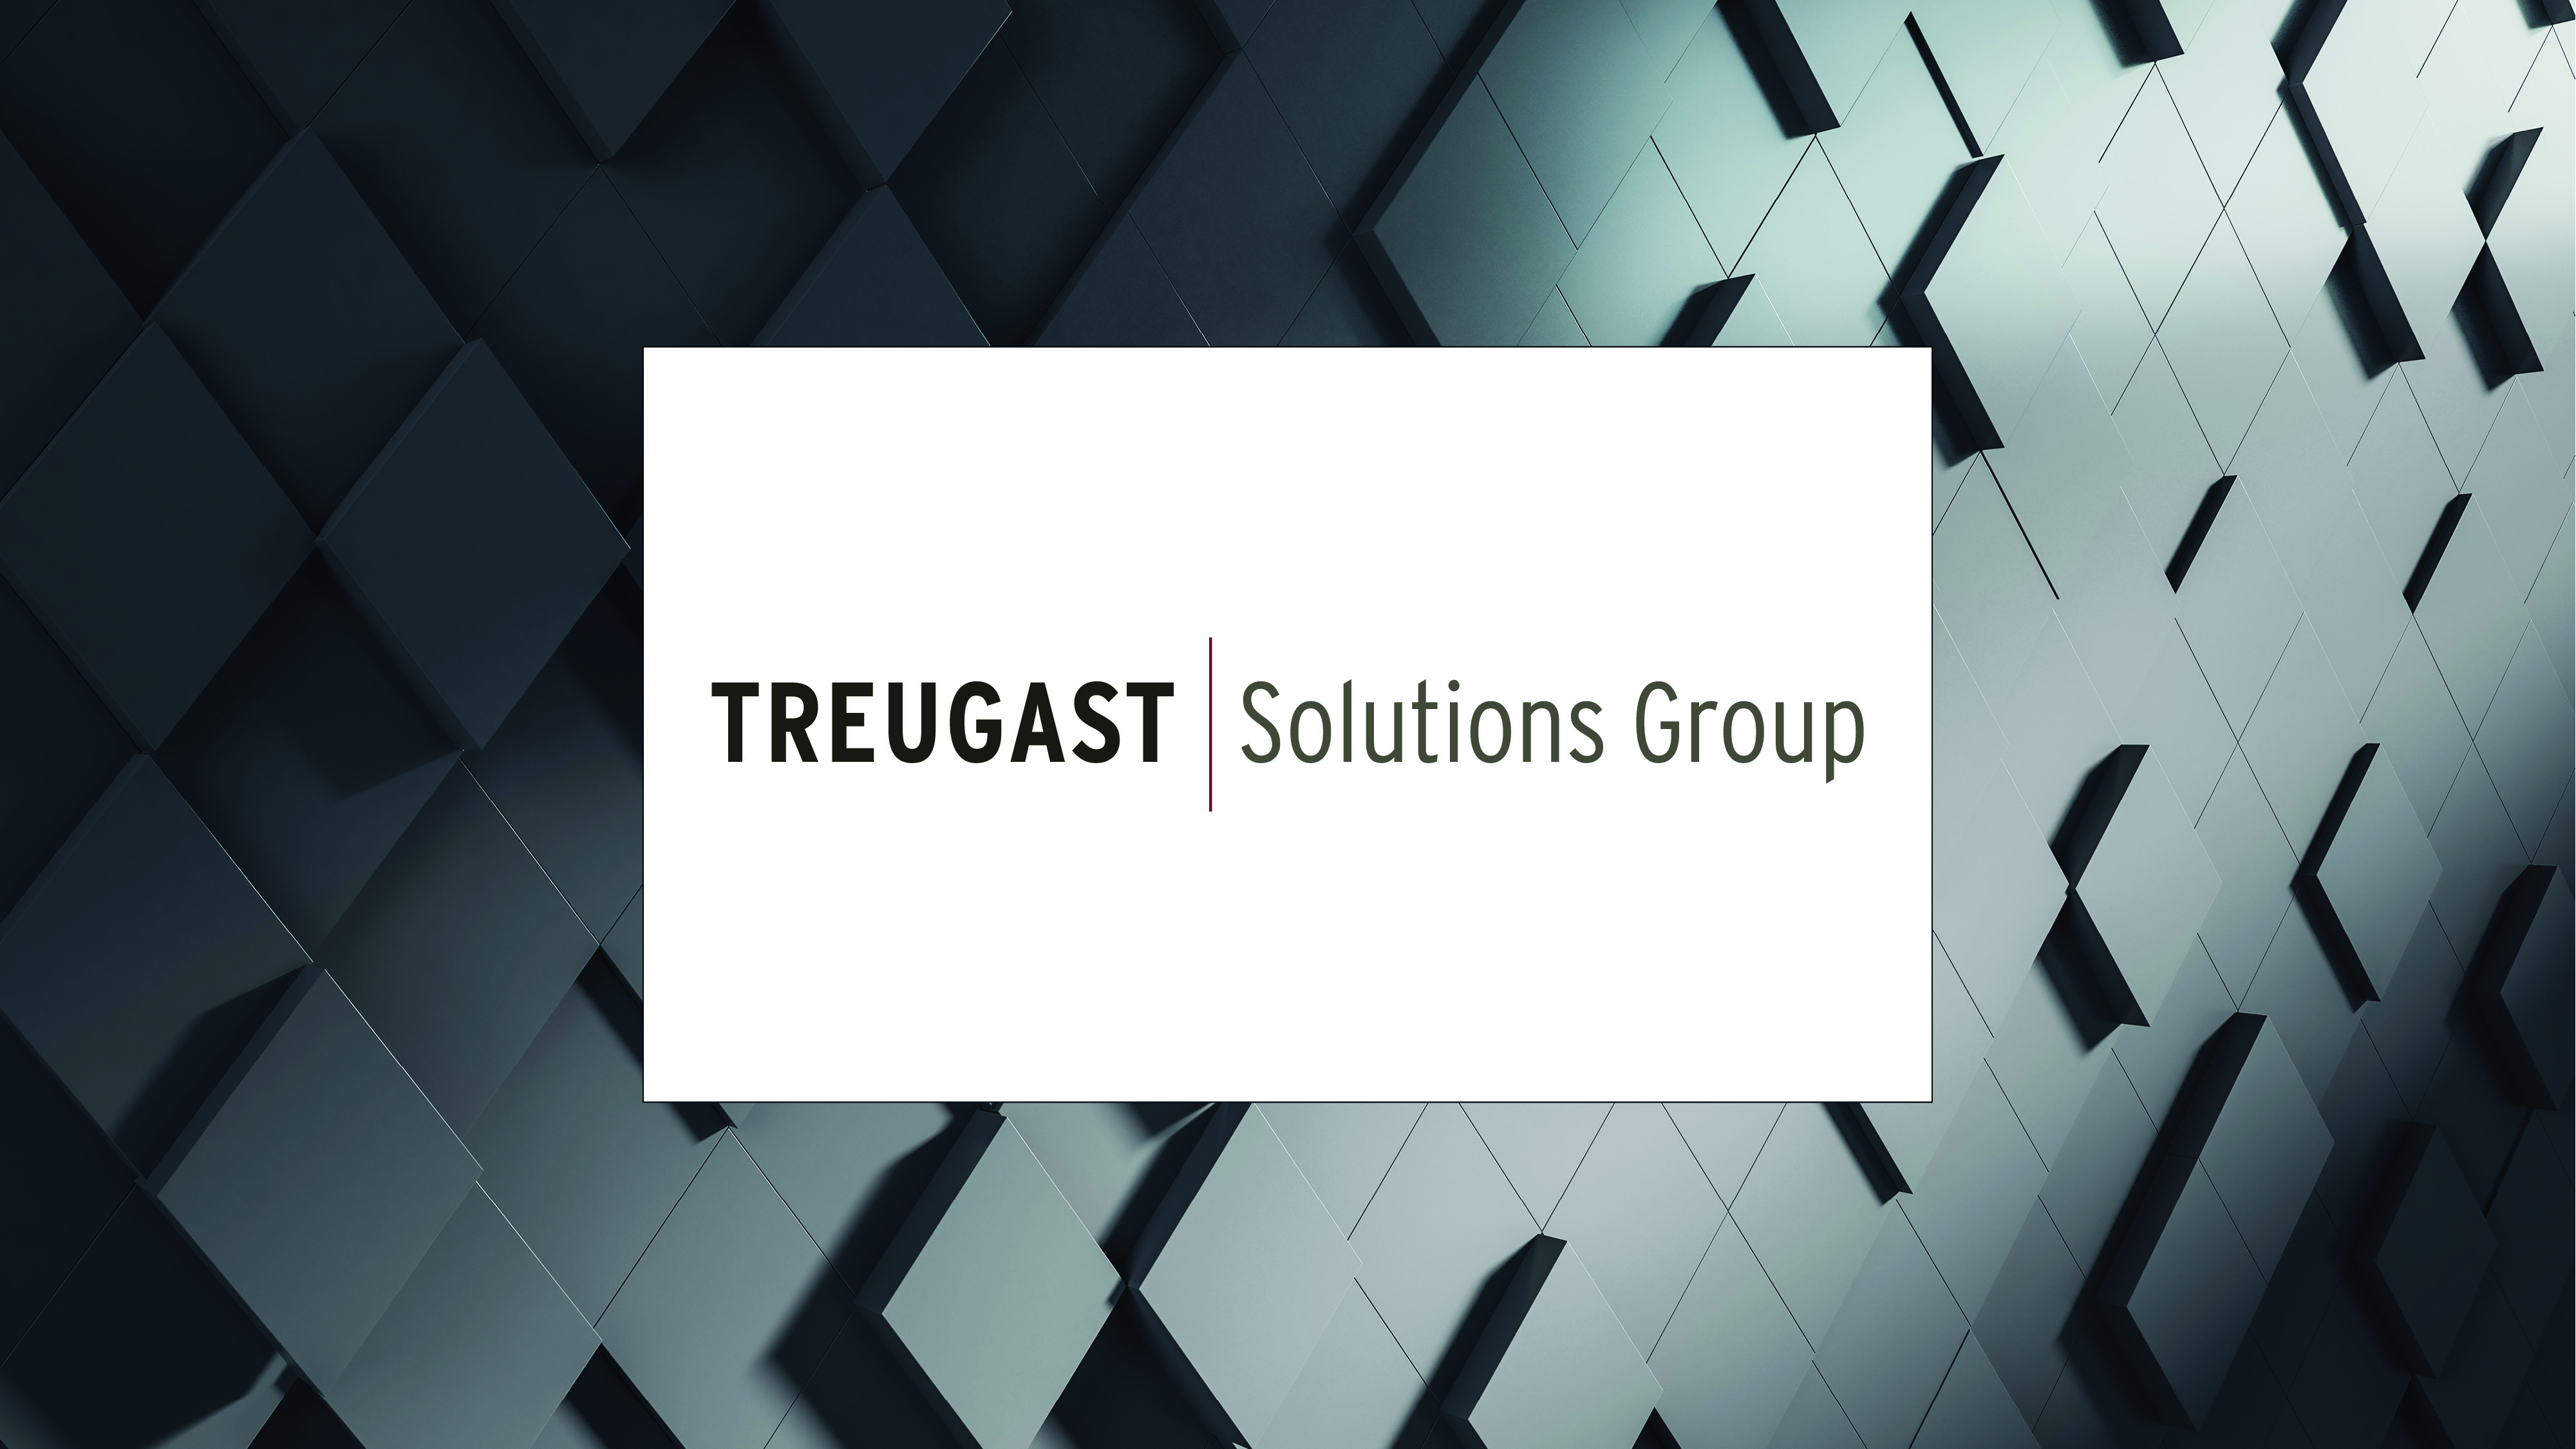 Treugast Solutions Group